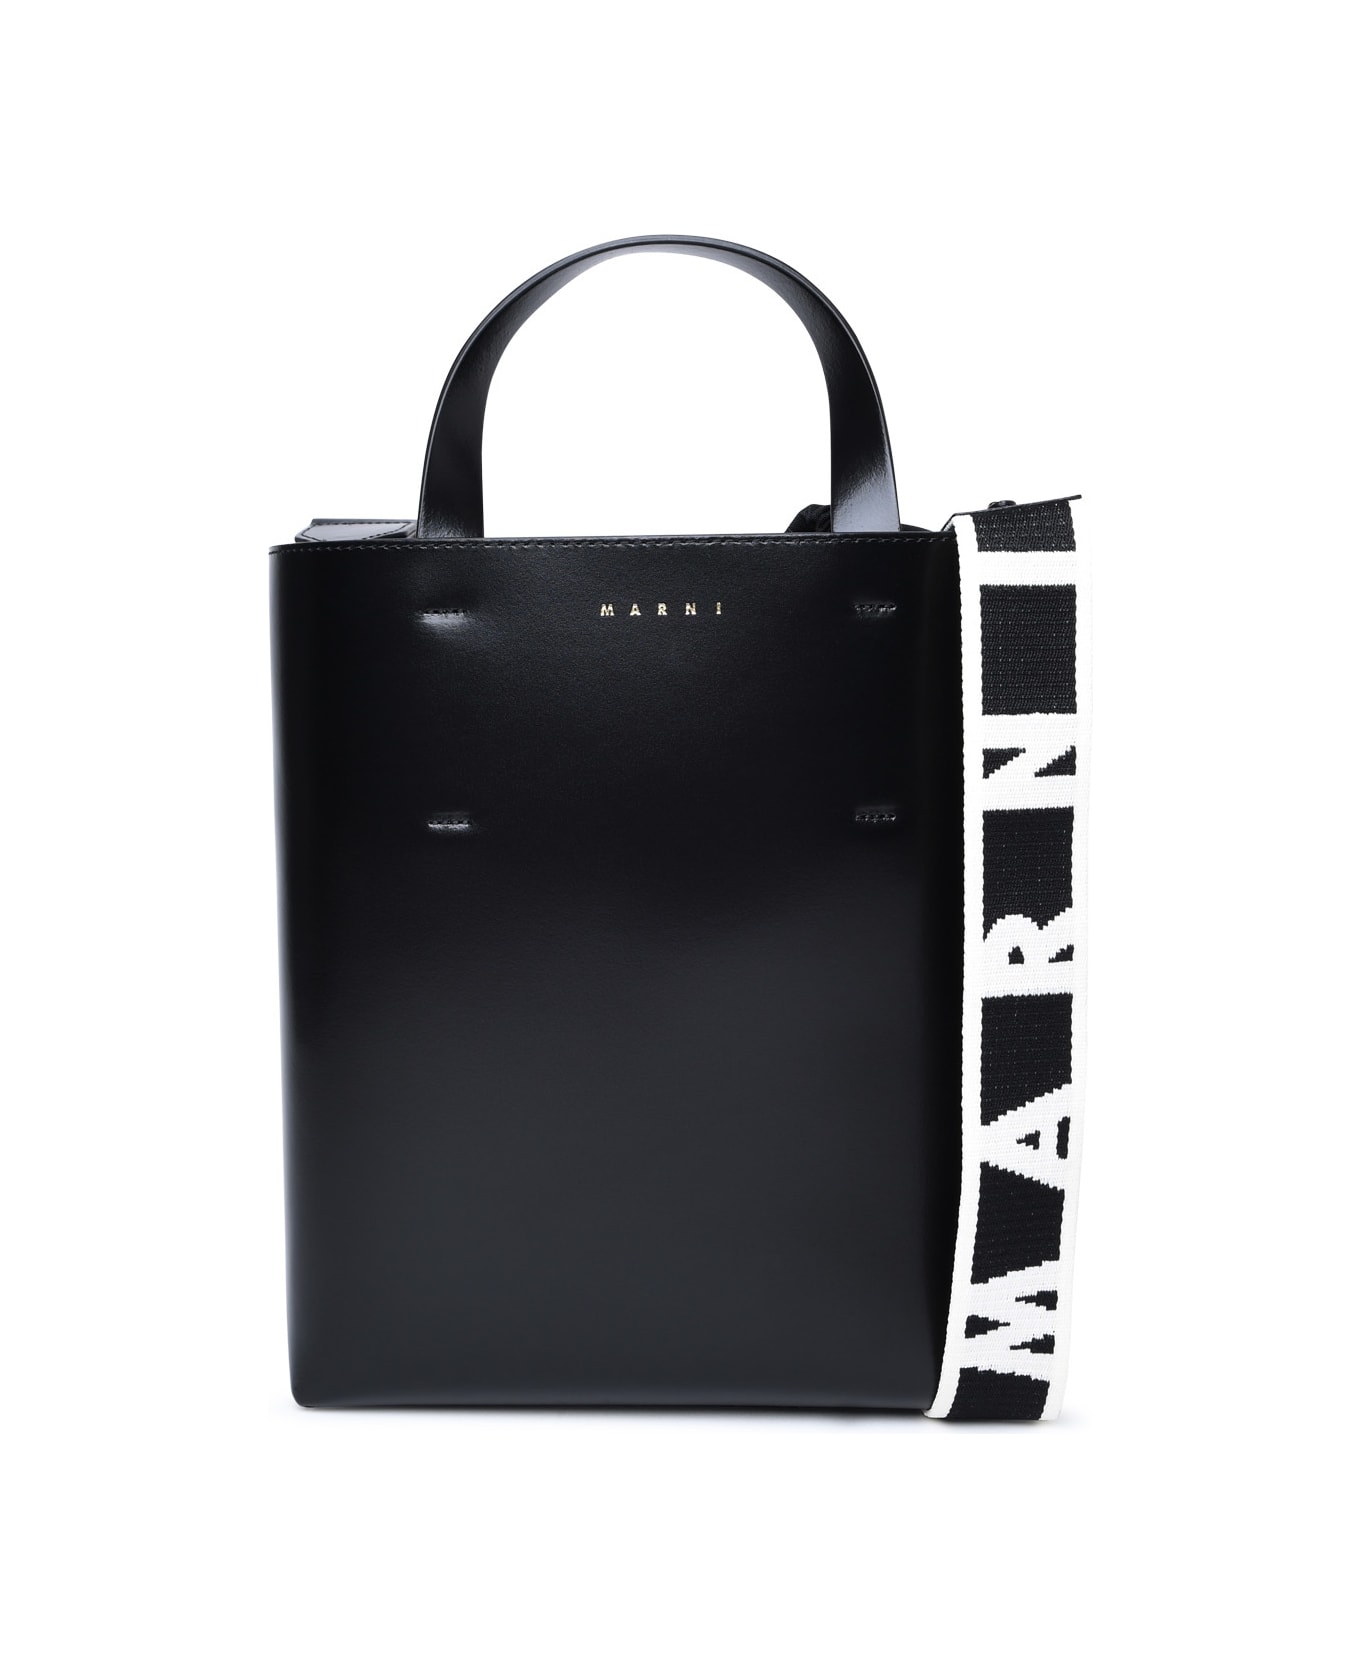 Marni Small 'museo' Black Leather Bag - Black トートバッグ